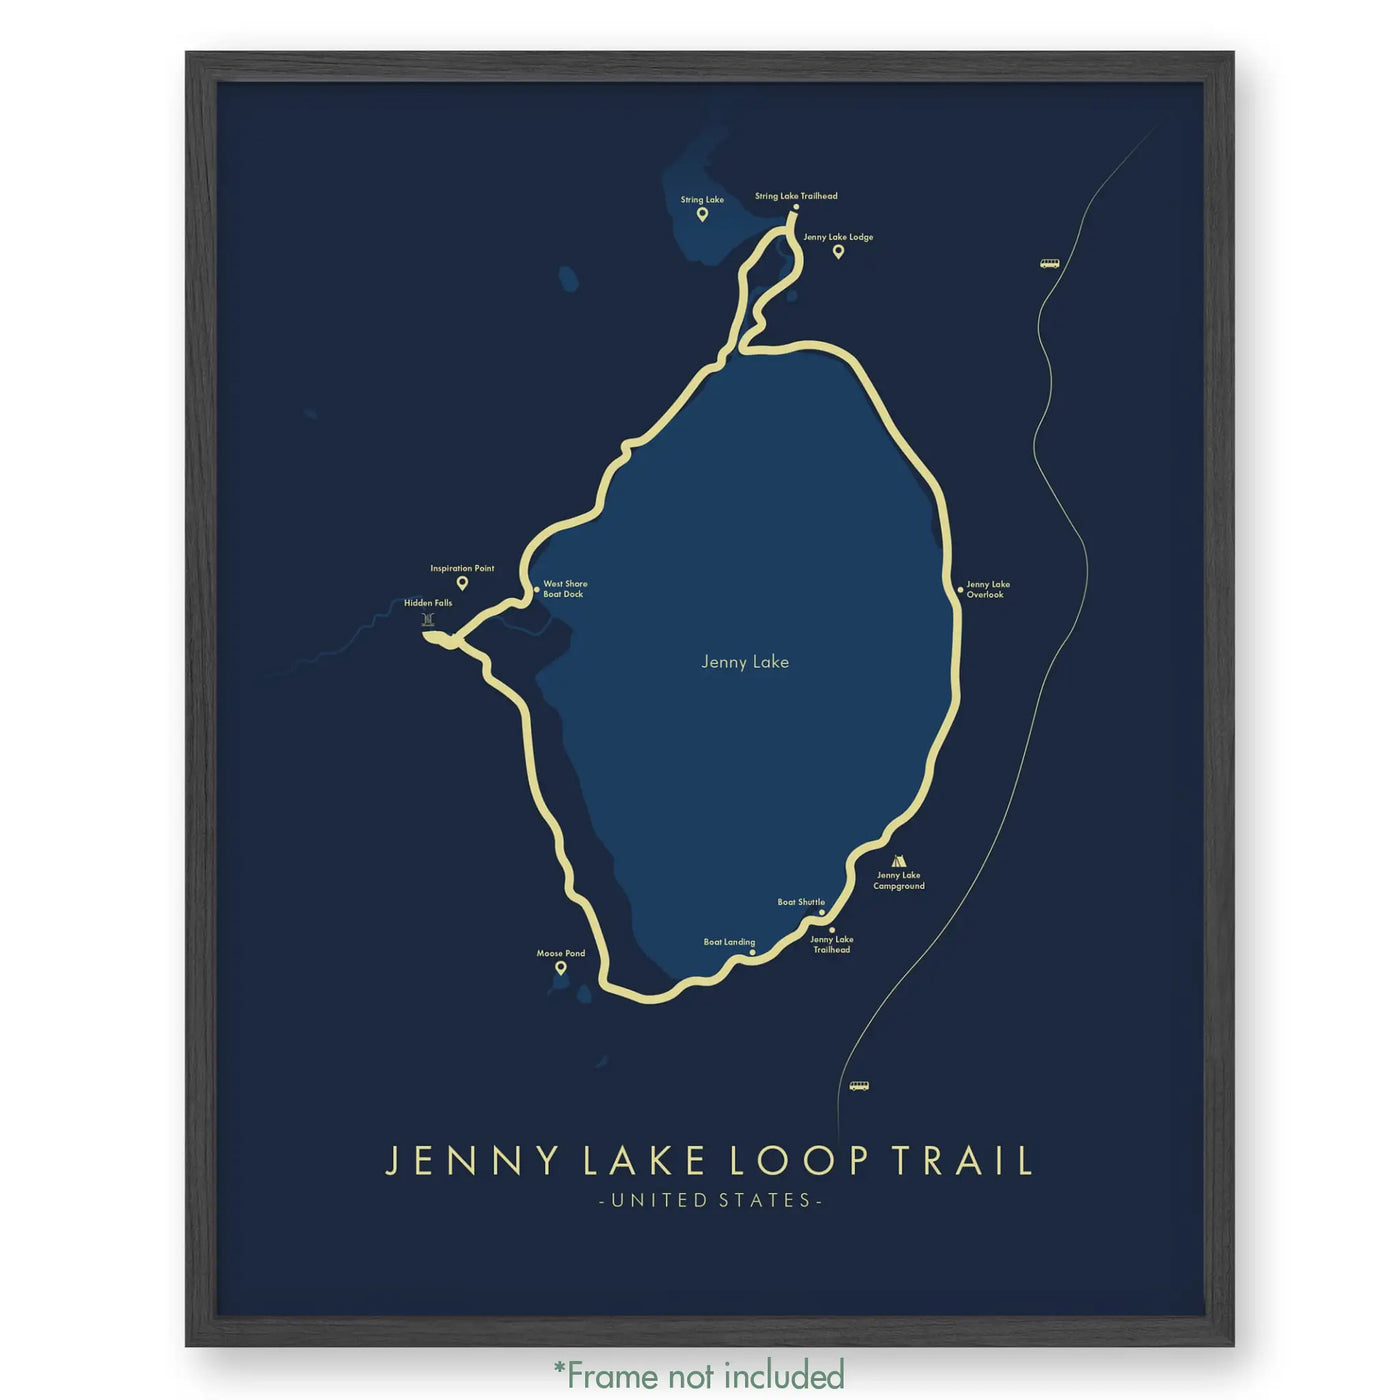 Trail Poster of Jenny Lake Loop Trail - Blue